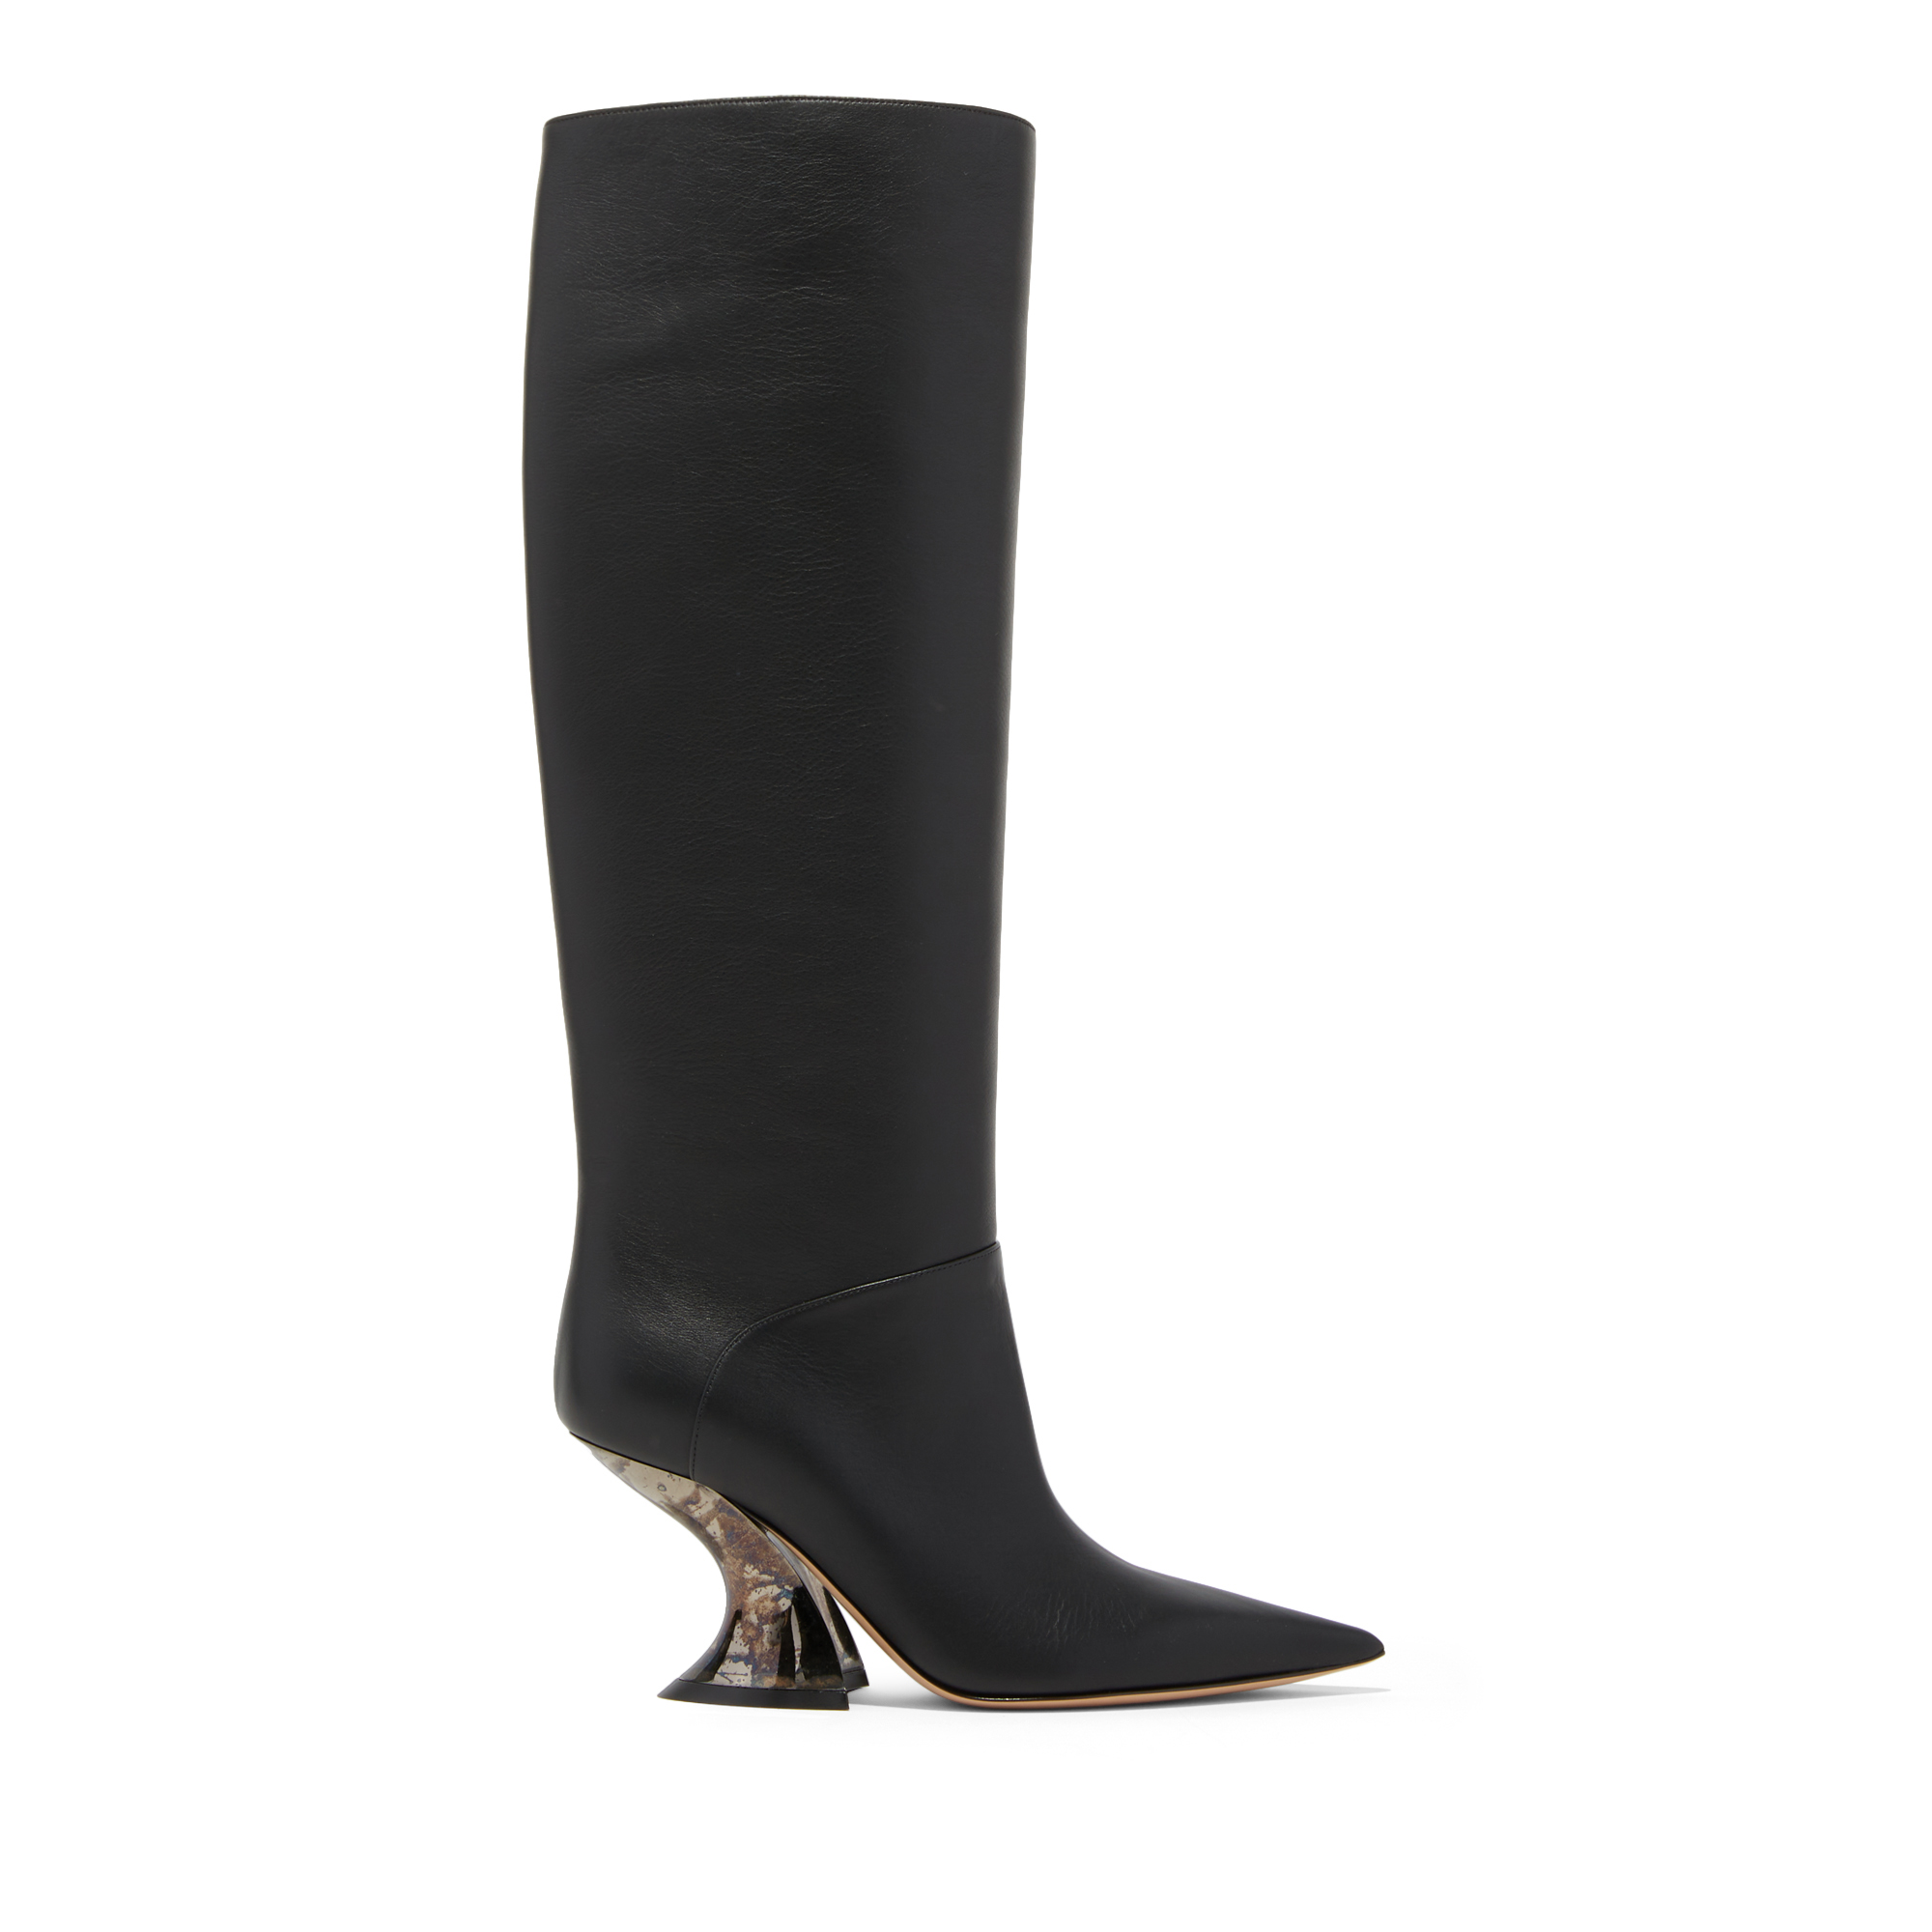 Casadei Elodie Leather - Woman High Boots Black 38